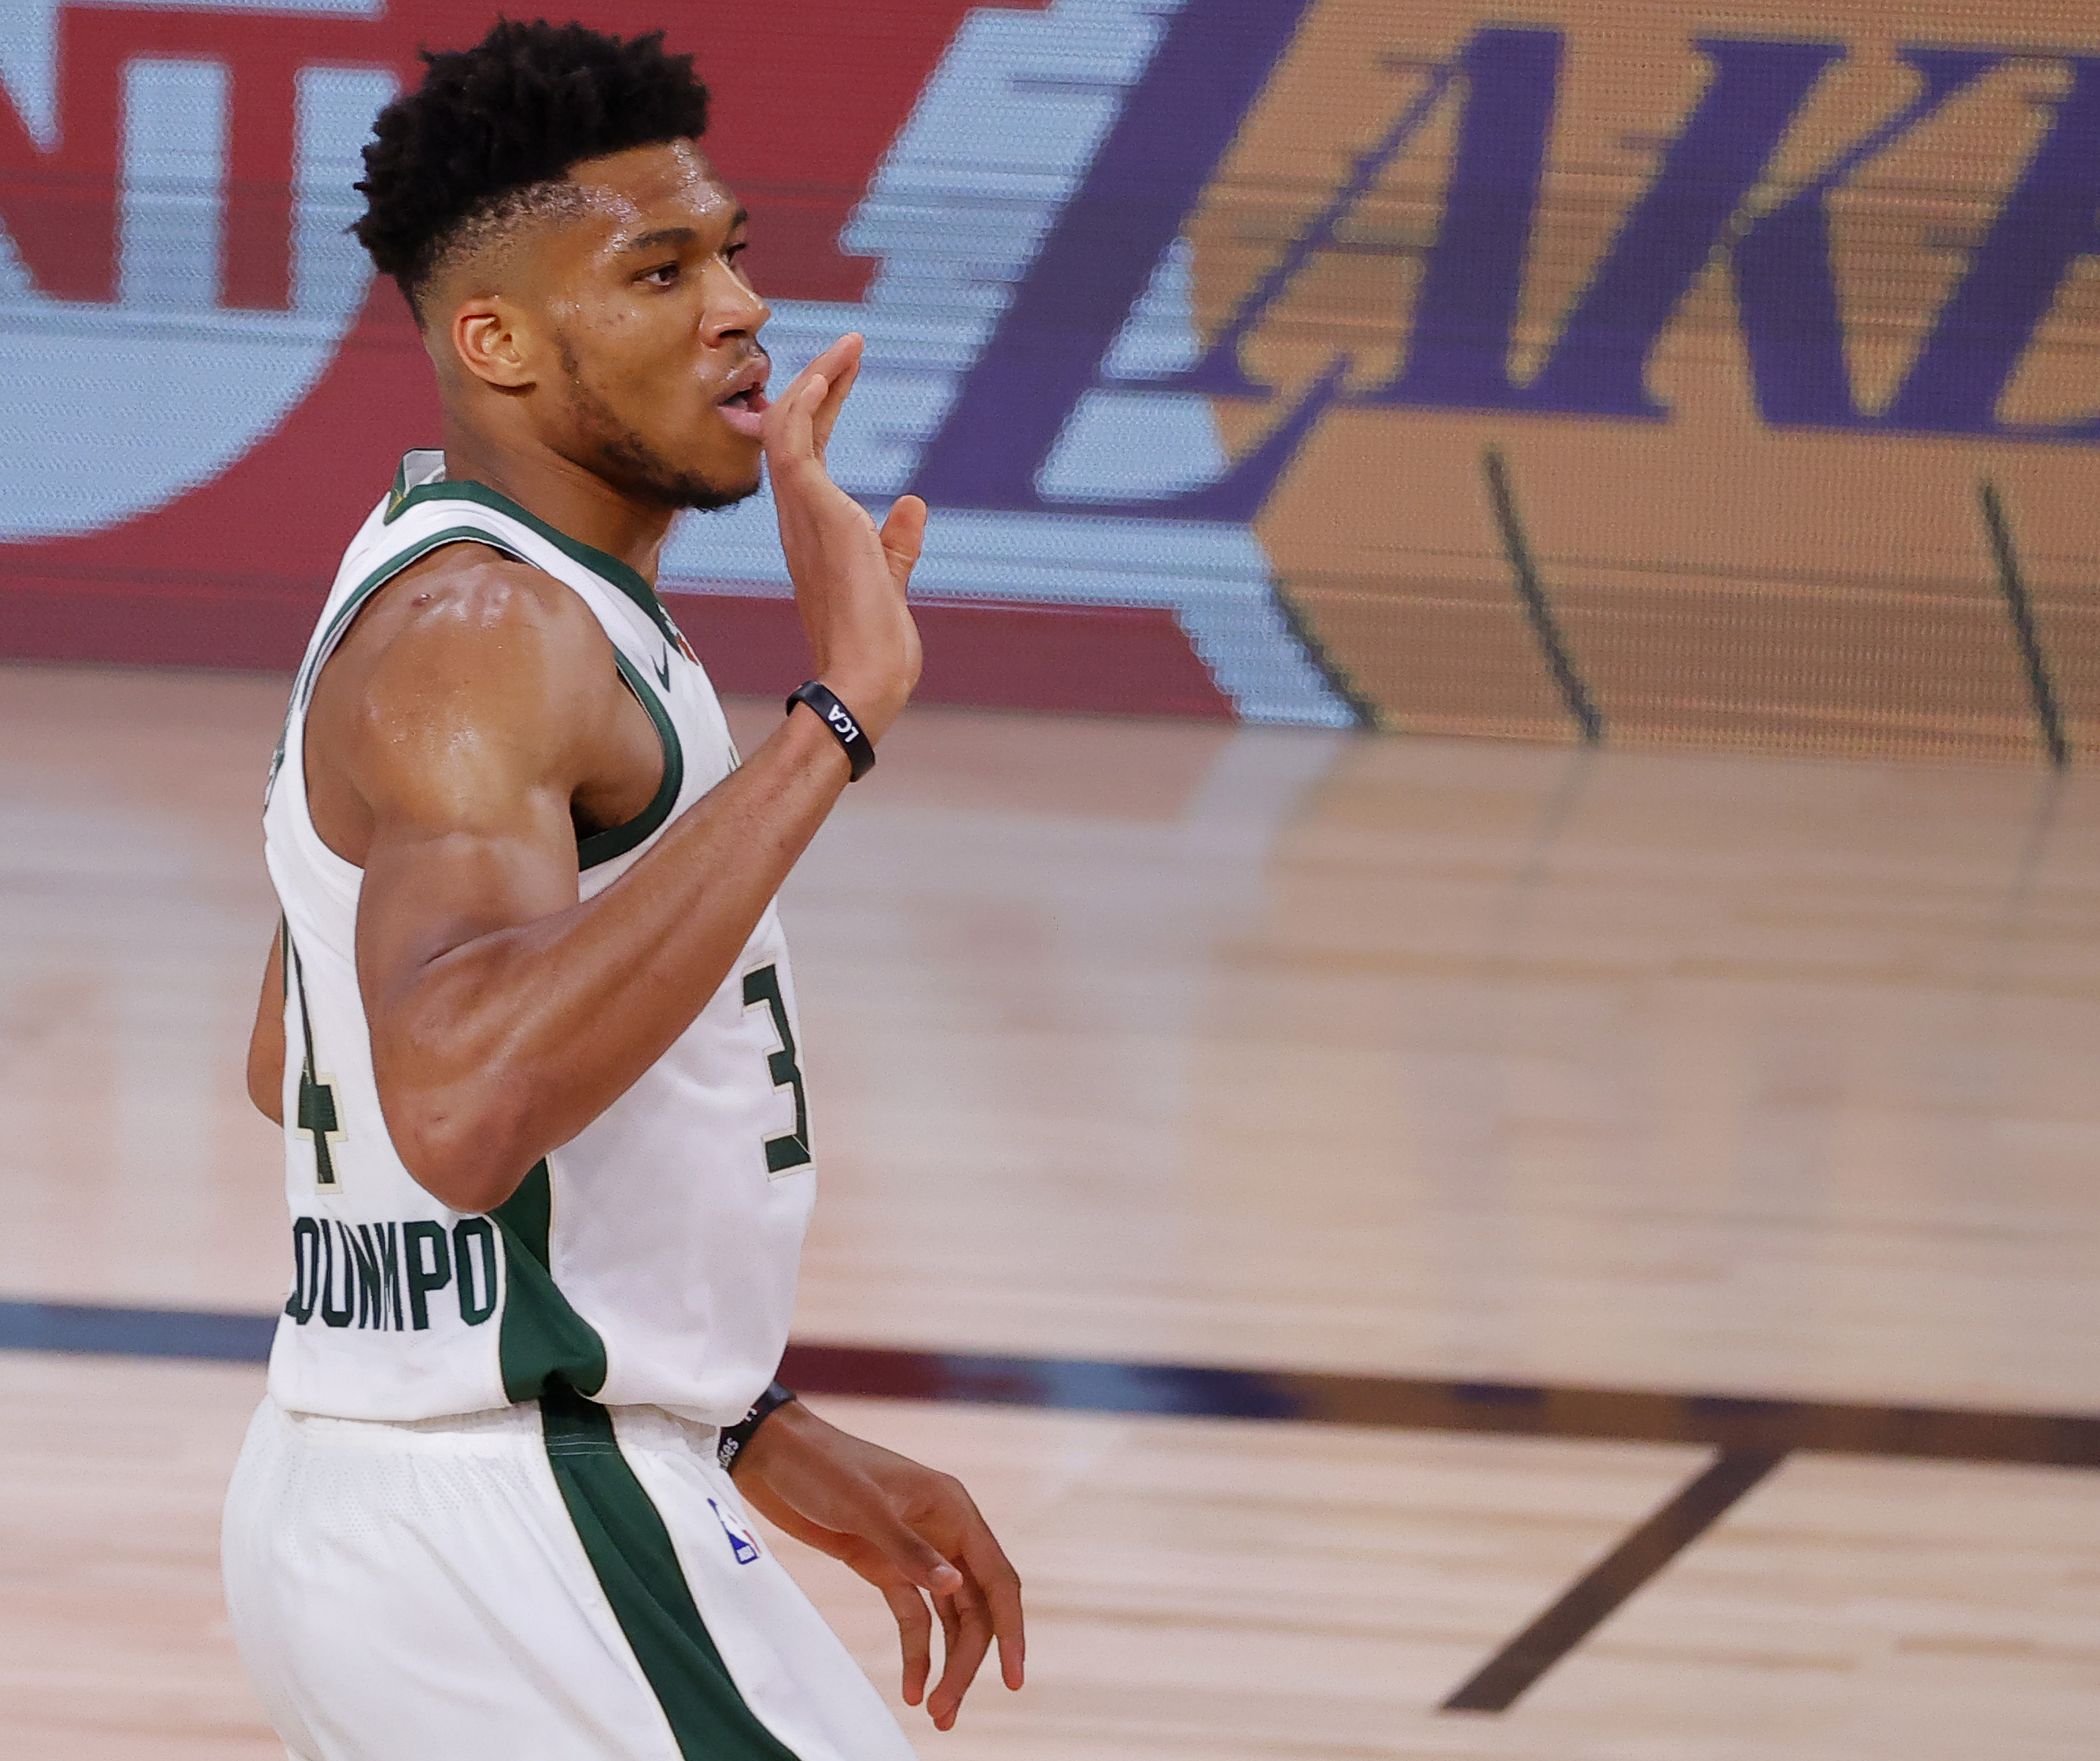 The Miami Heat may have a backup plan if Giannis Antetokounmpo remains in Milwaukee.